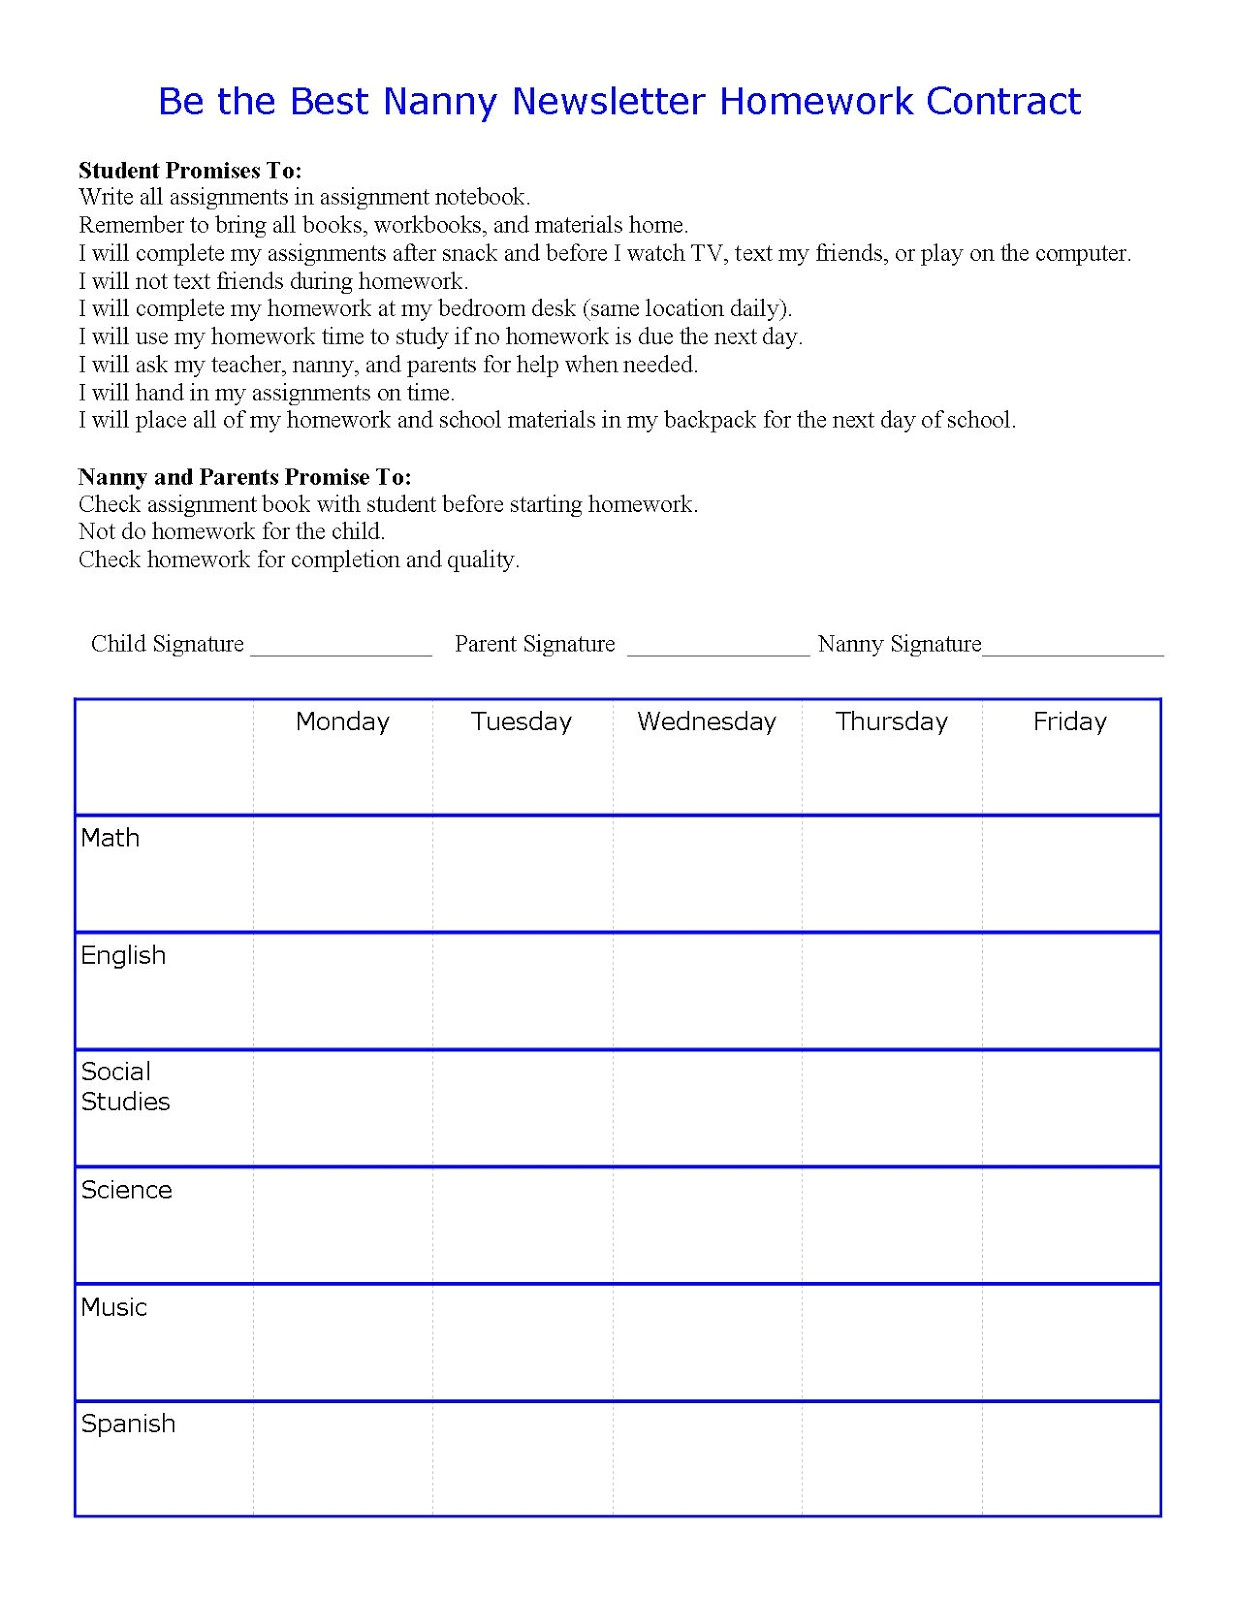 nanny and child homework contract